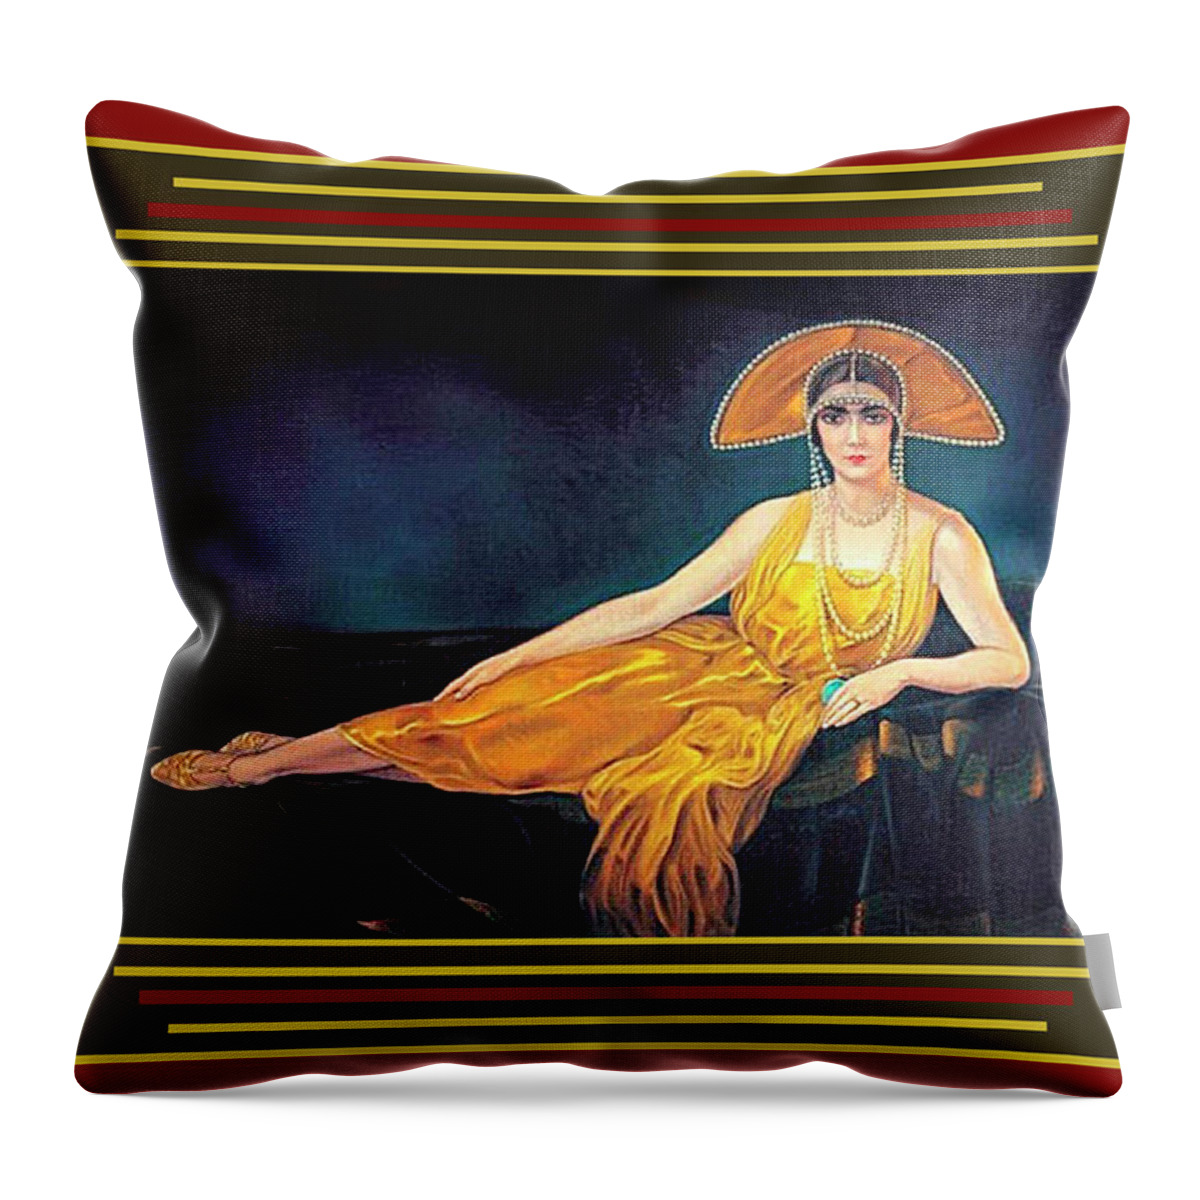 Staley Throw Pillow featuring the digital art Italia by Chuck Staley